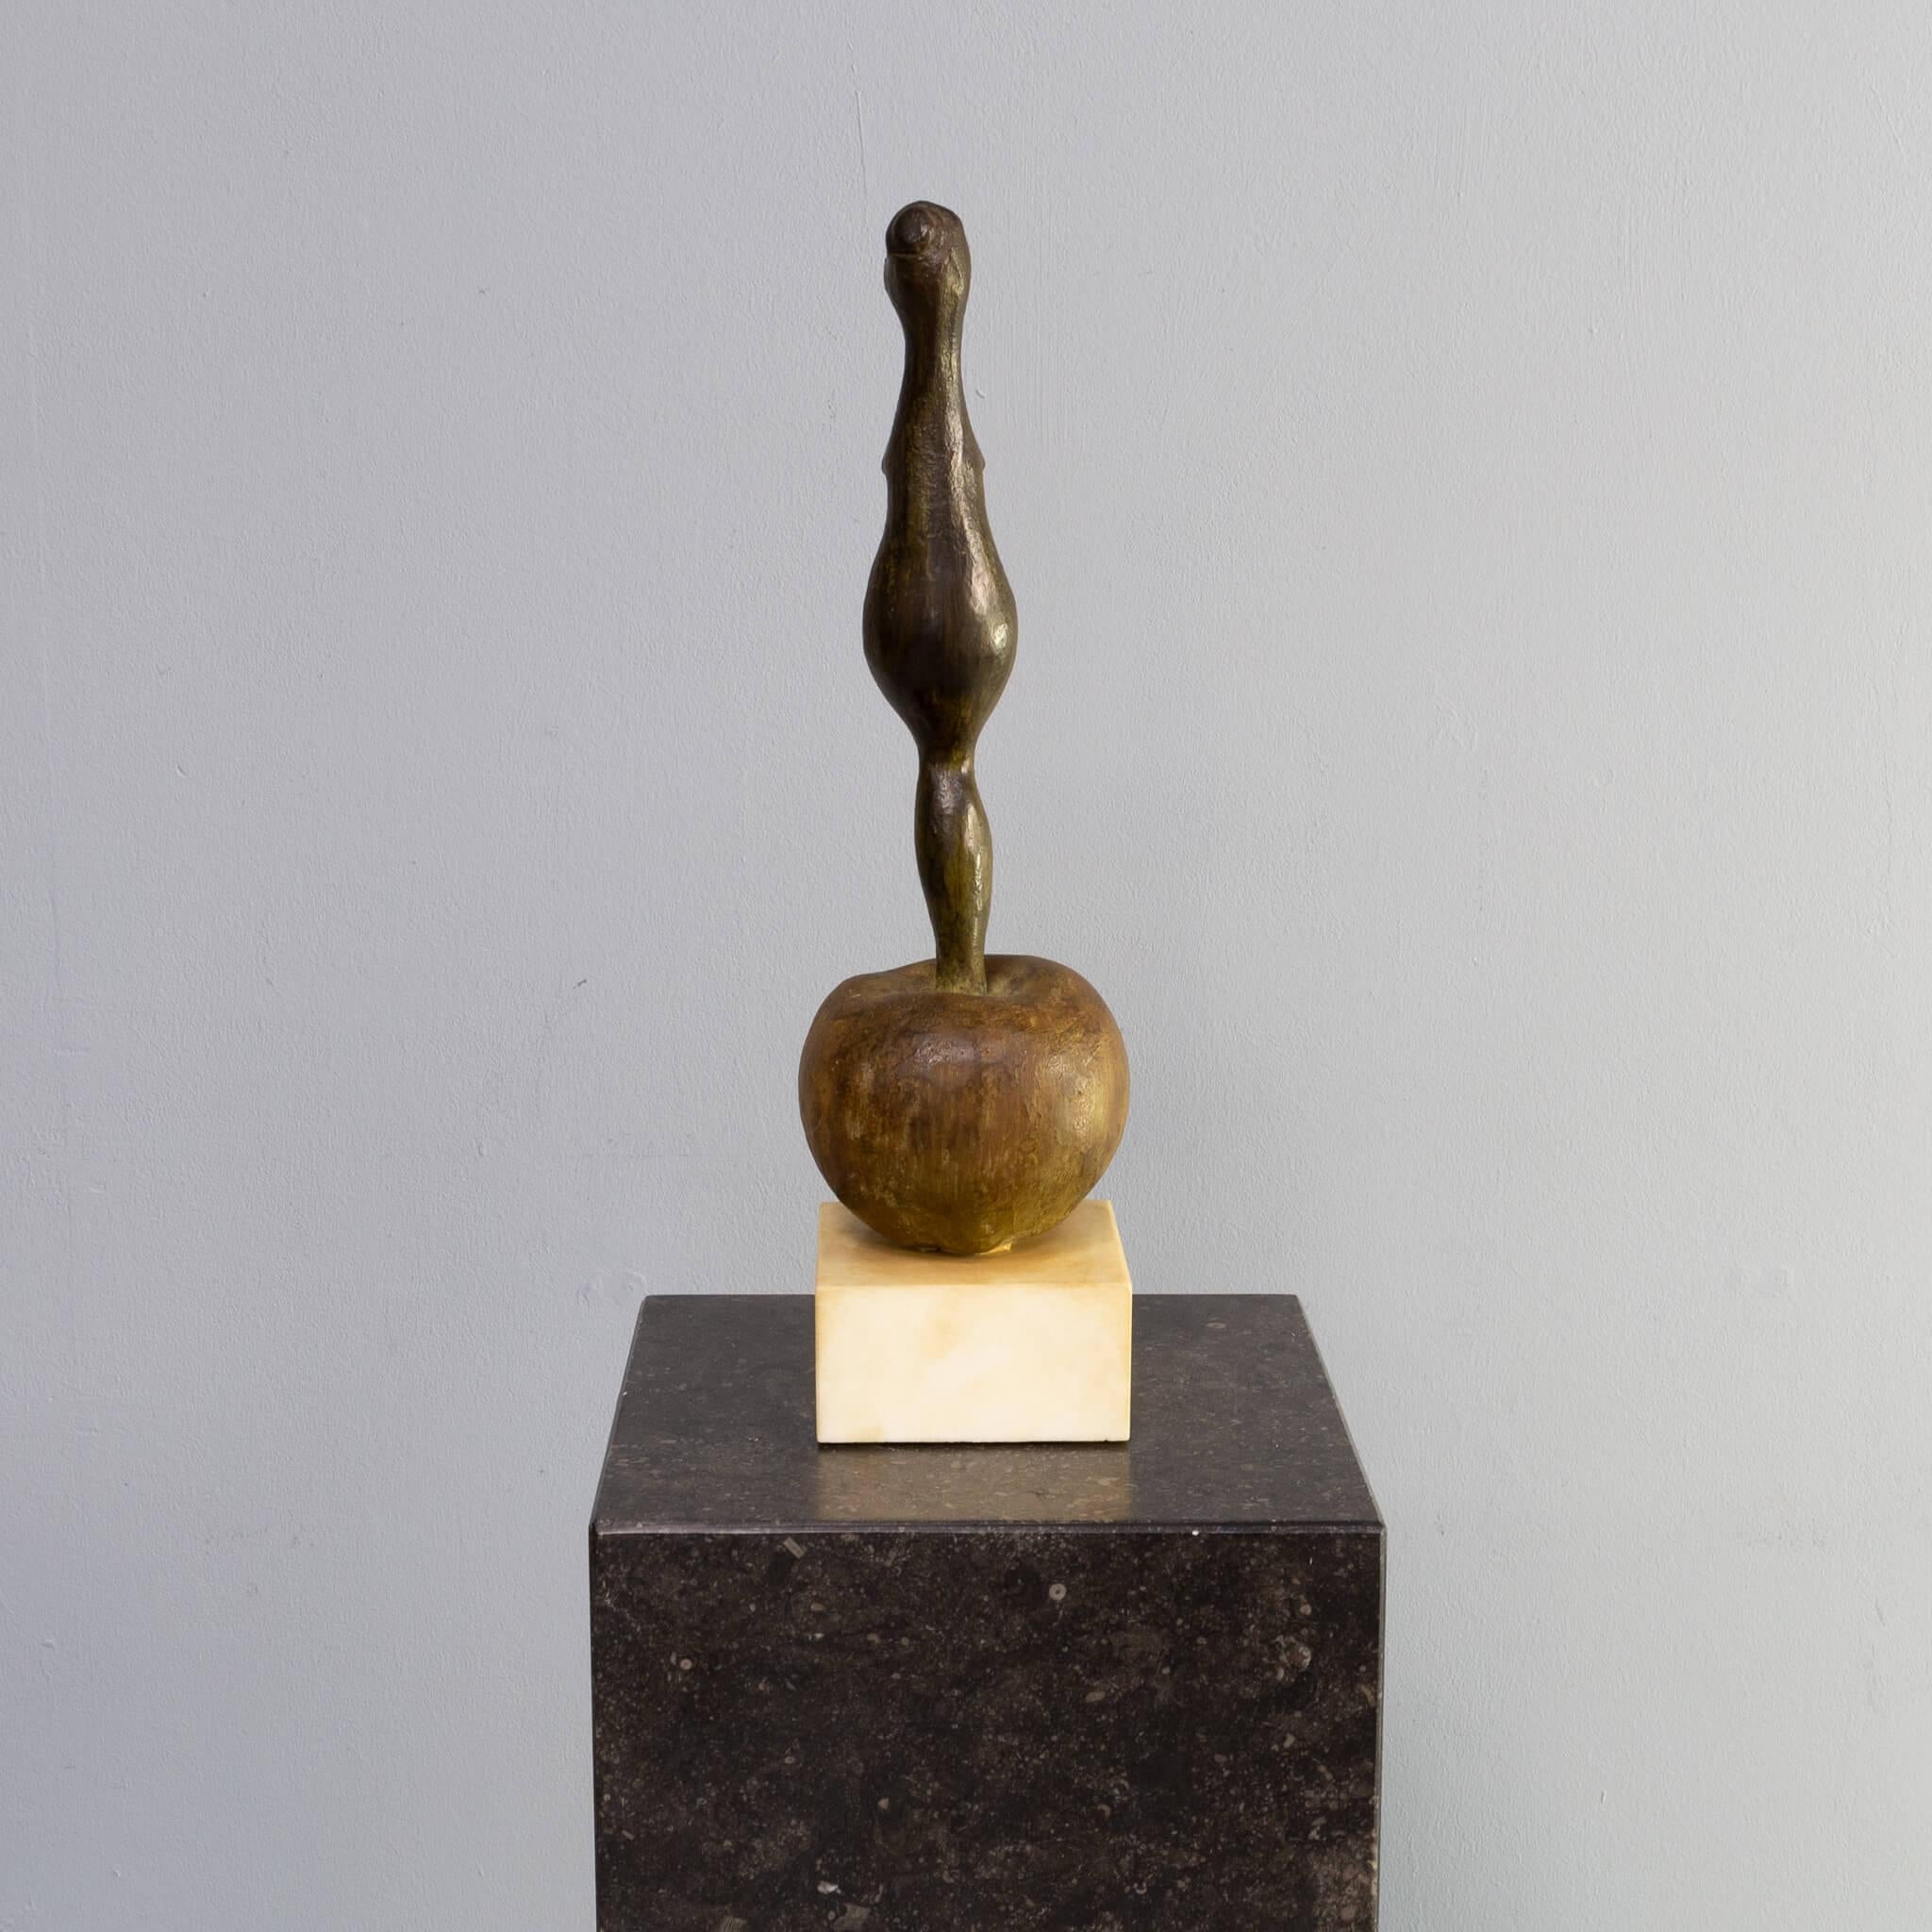 Dutch Godfried Pieters Sculpture ‘Abstract Woman on a Ball’ For Sale